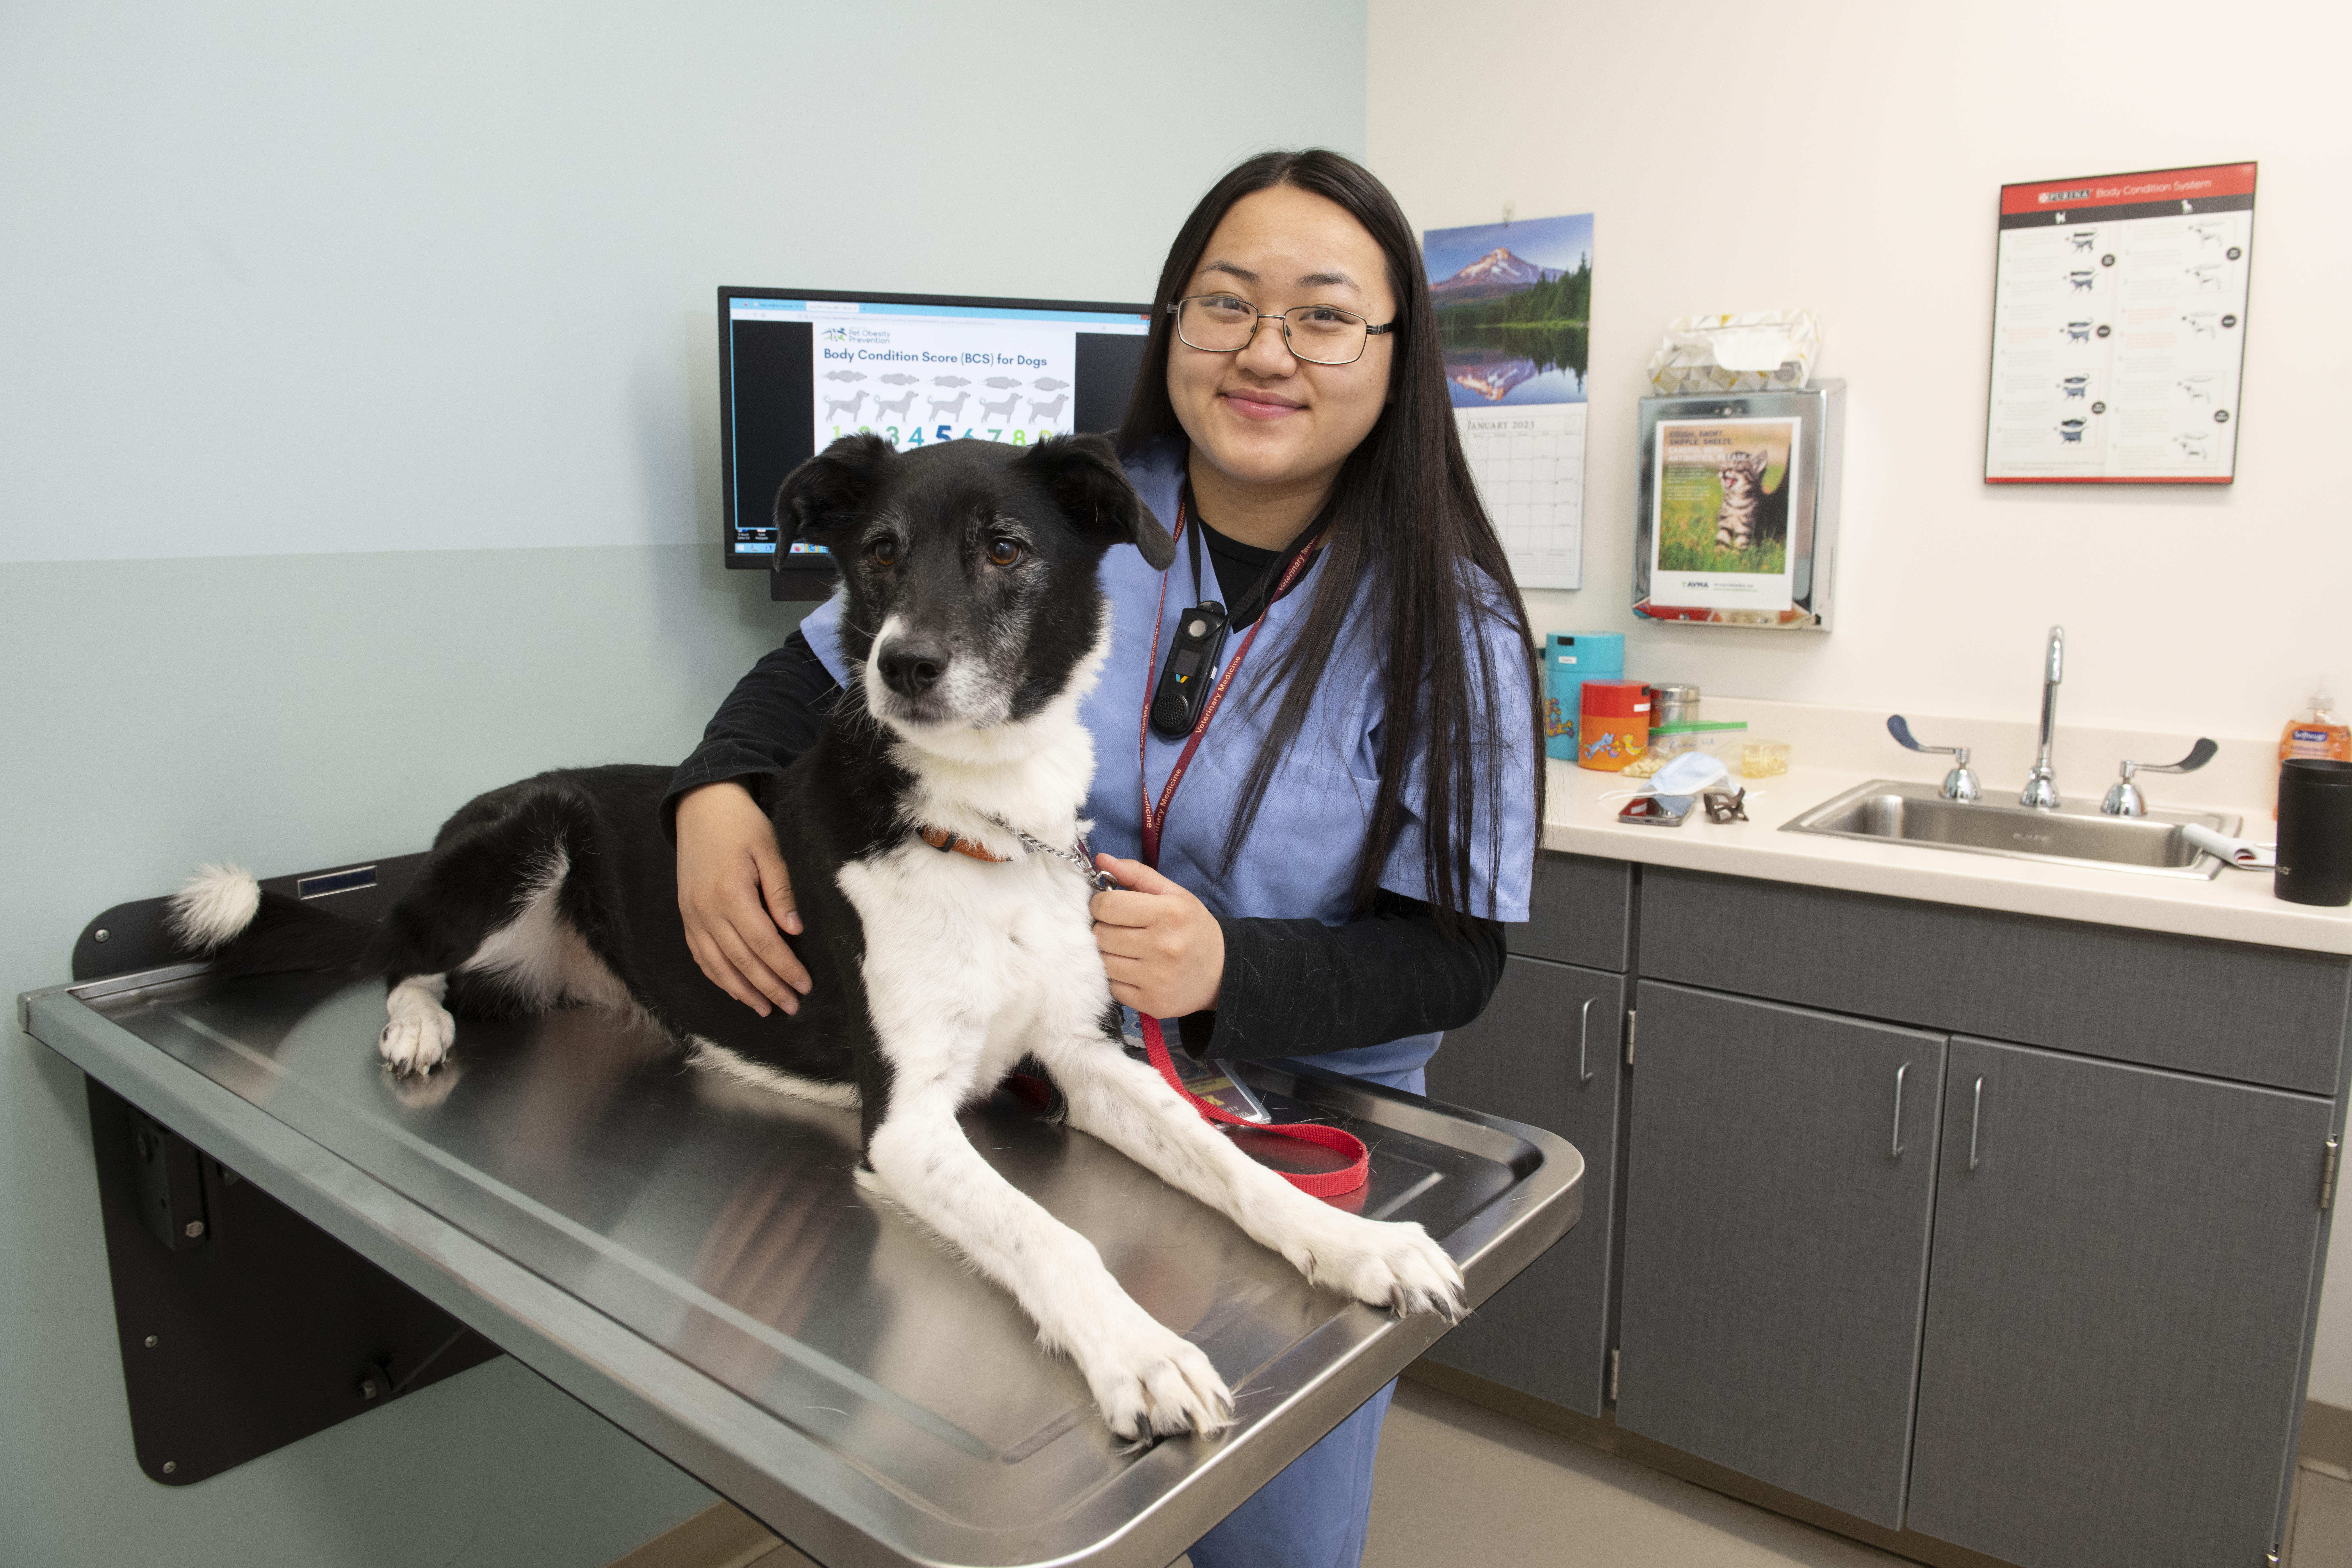 Angelie, a vet tech assistant, and Nigel, a cute black and white dog, in an exam room